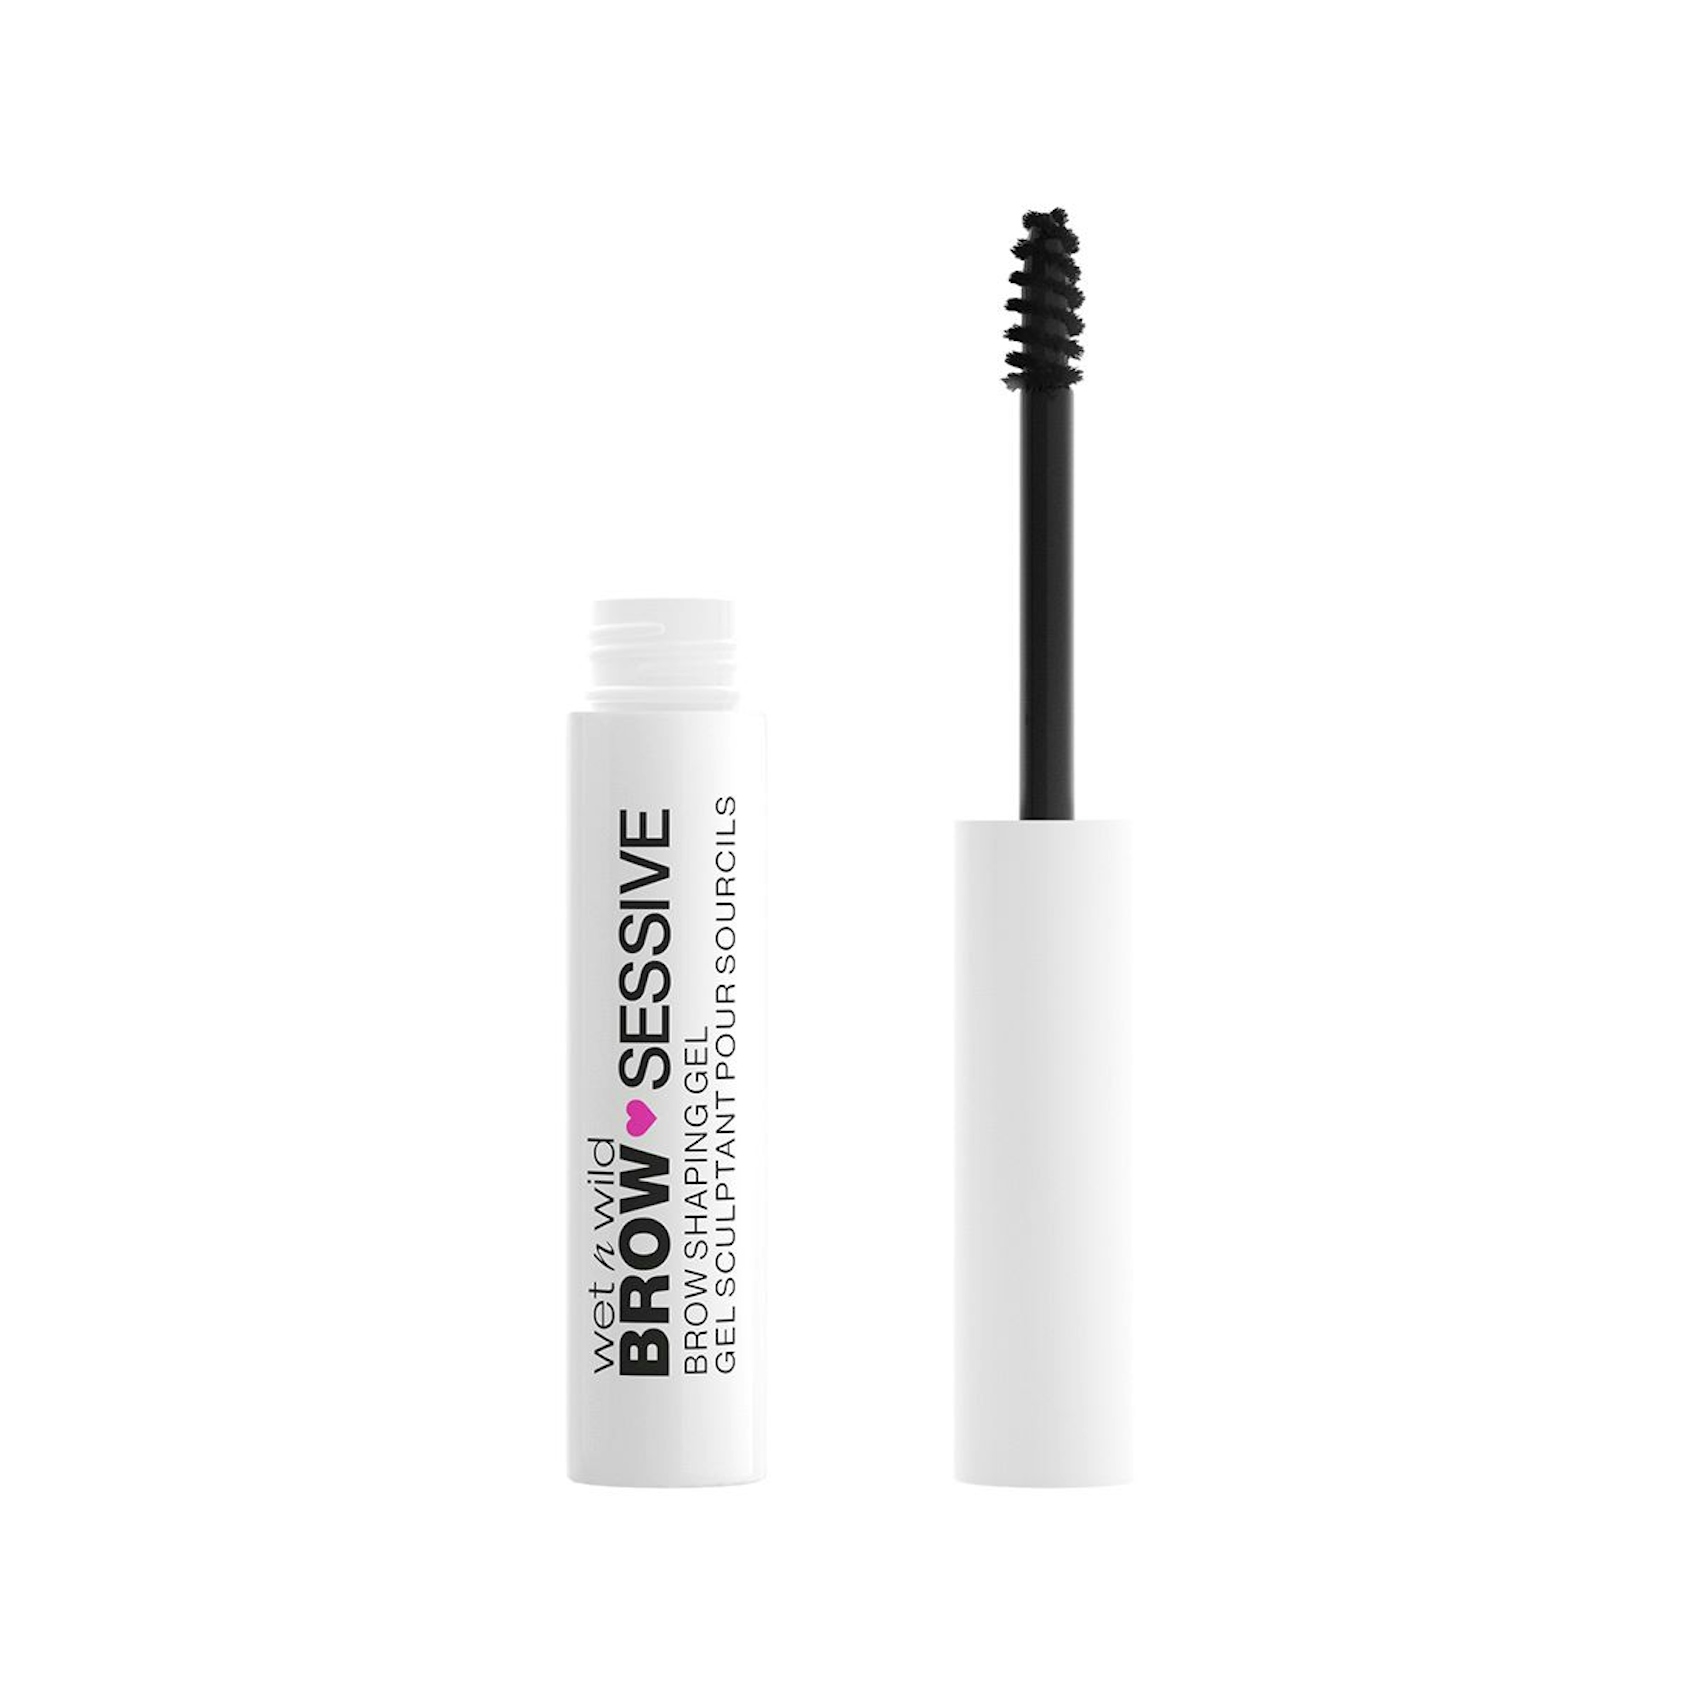 NEW! BROW-SESSIVE BROW SHAPING GEL Blonde